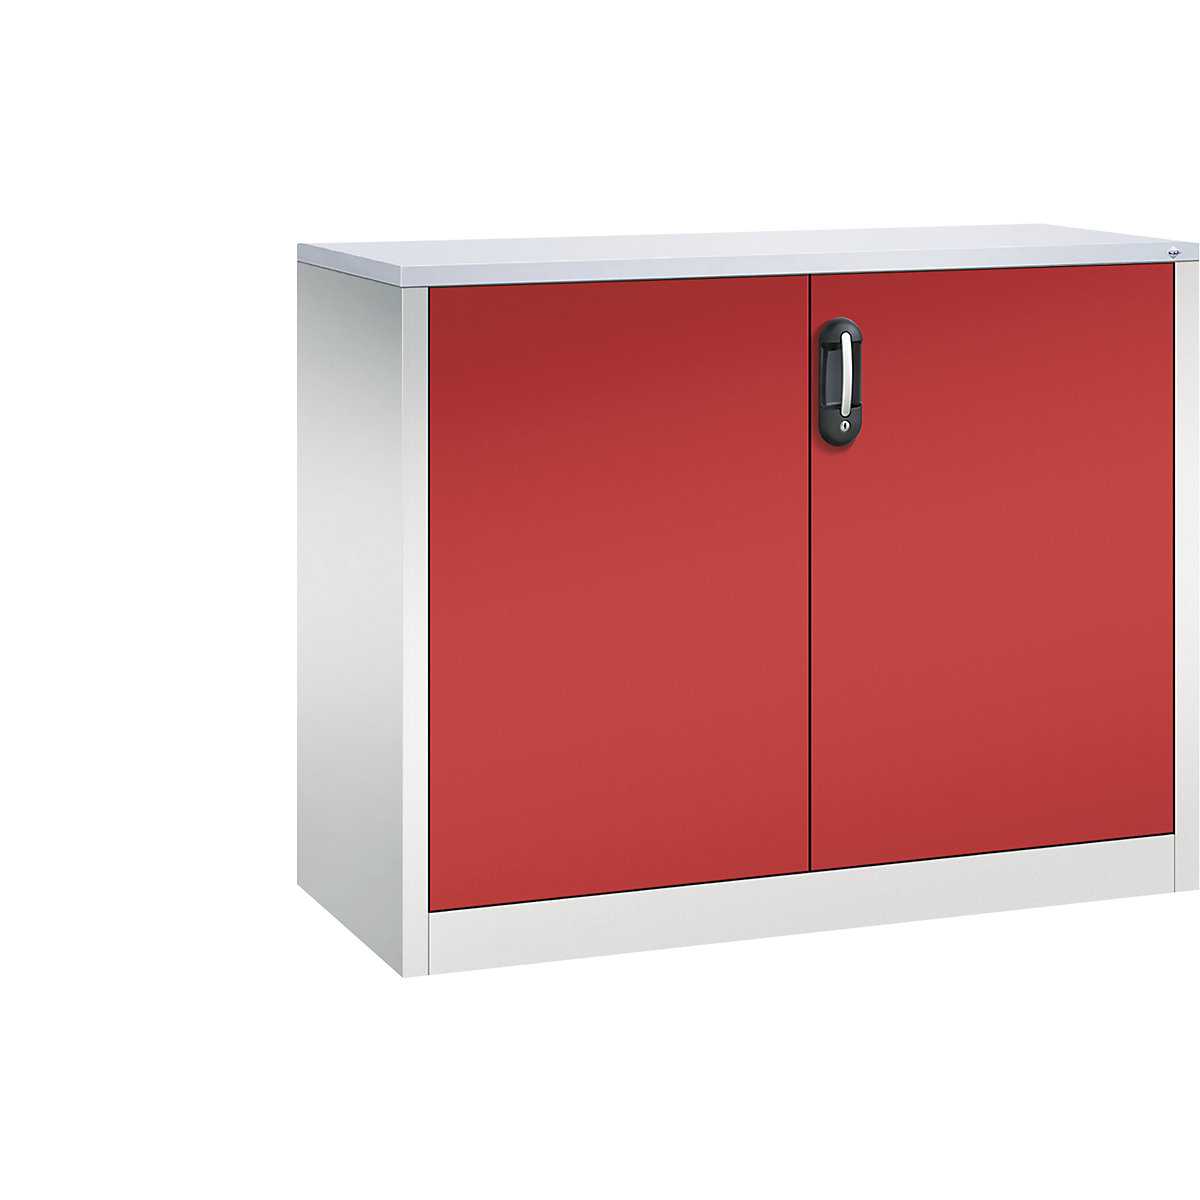 ACURADO filing sideboard – C+P, 2 file heights, HxWxD 1000 x 1200 x 500 mm, light grey / flame red-10